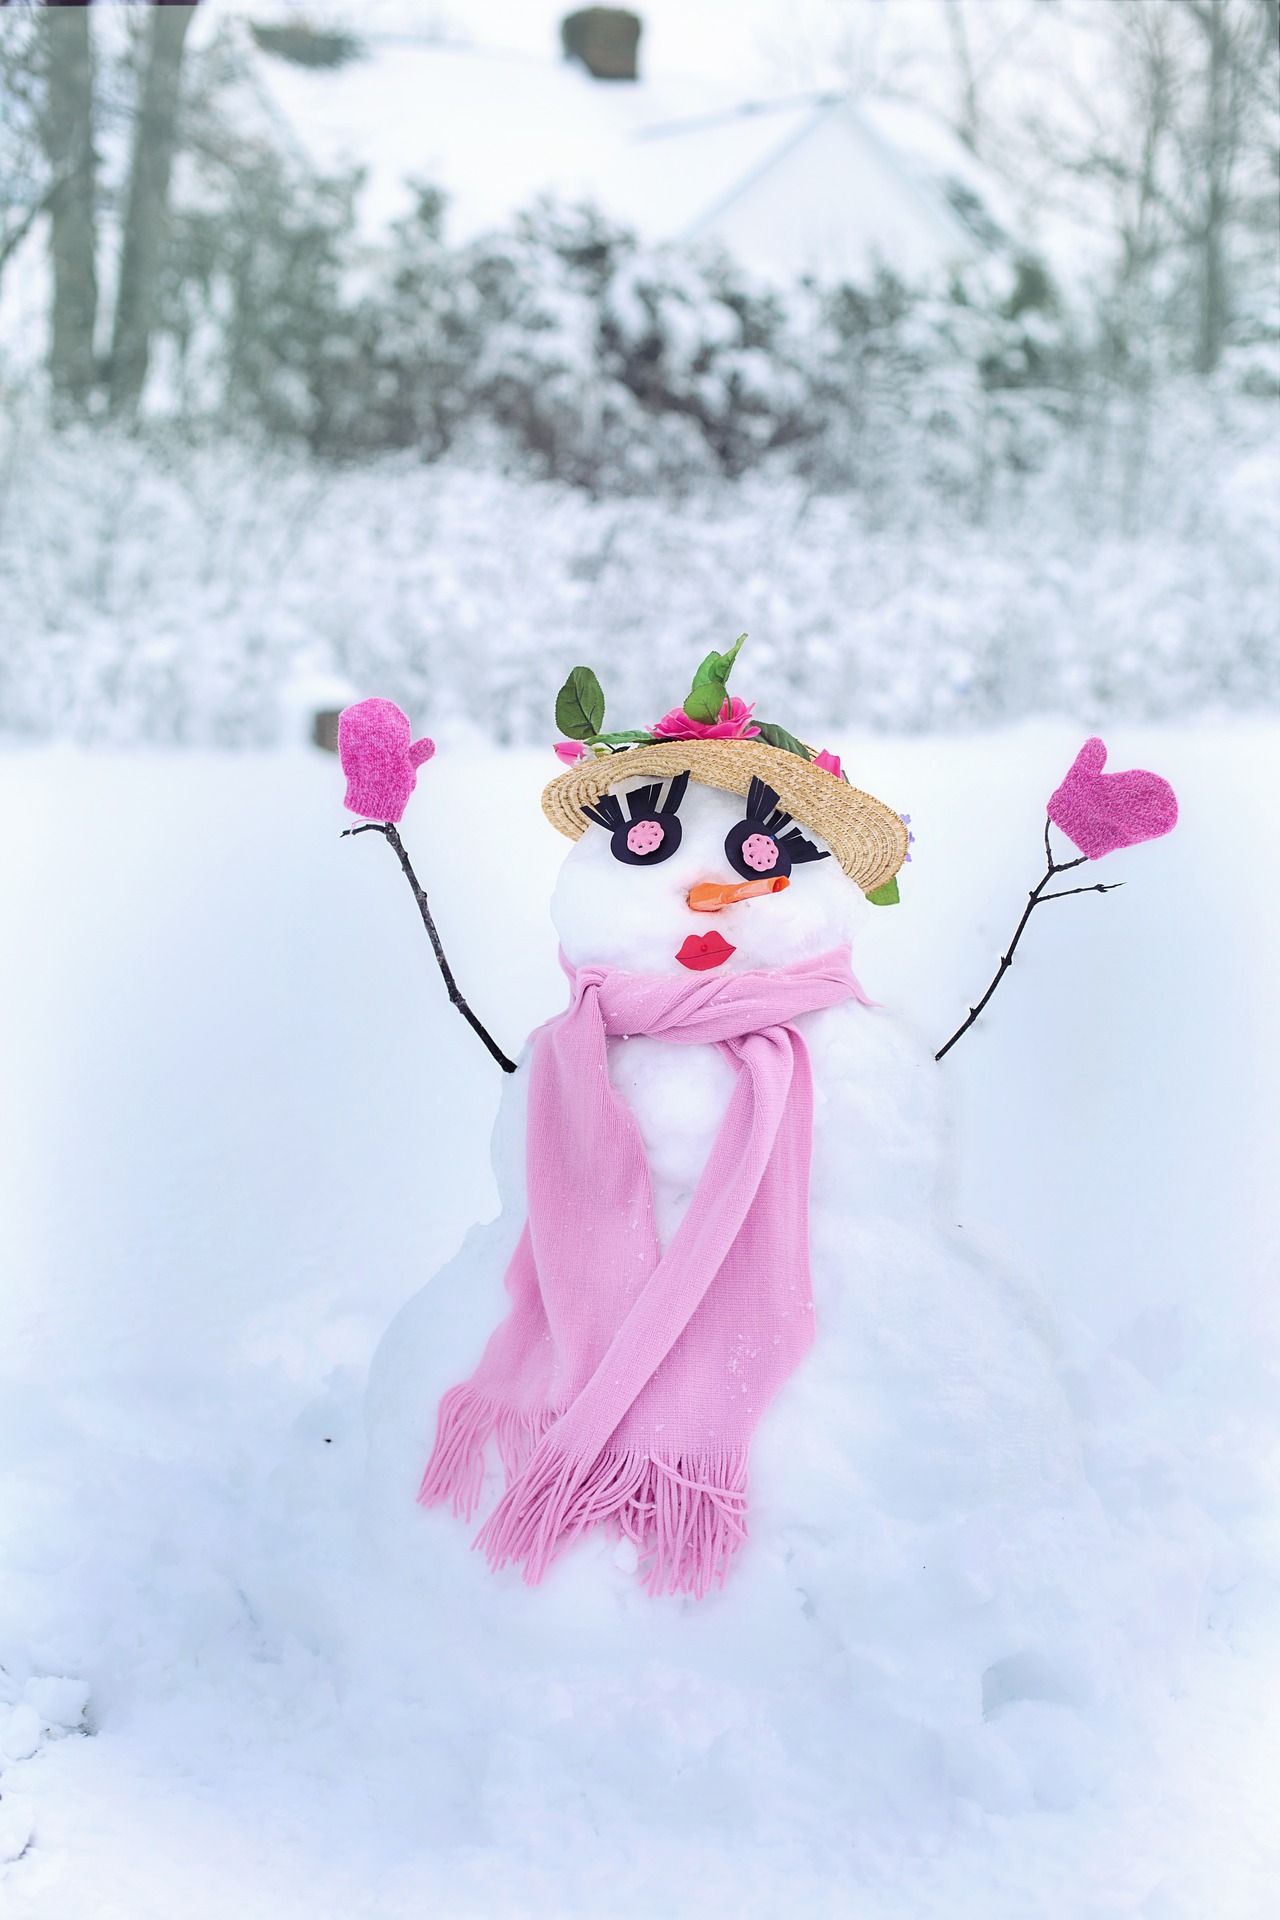 Snow woman in winter photo